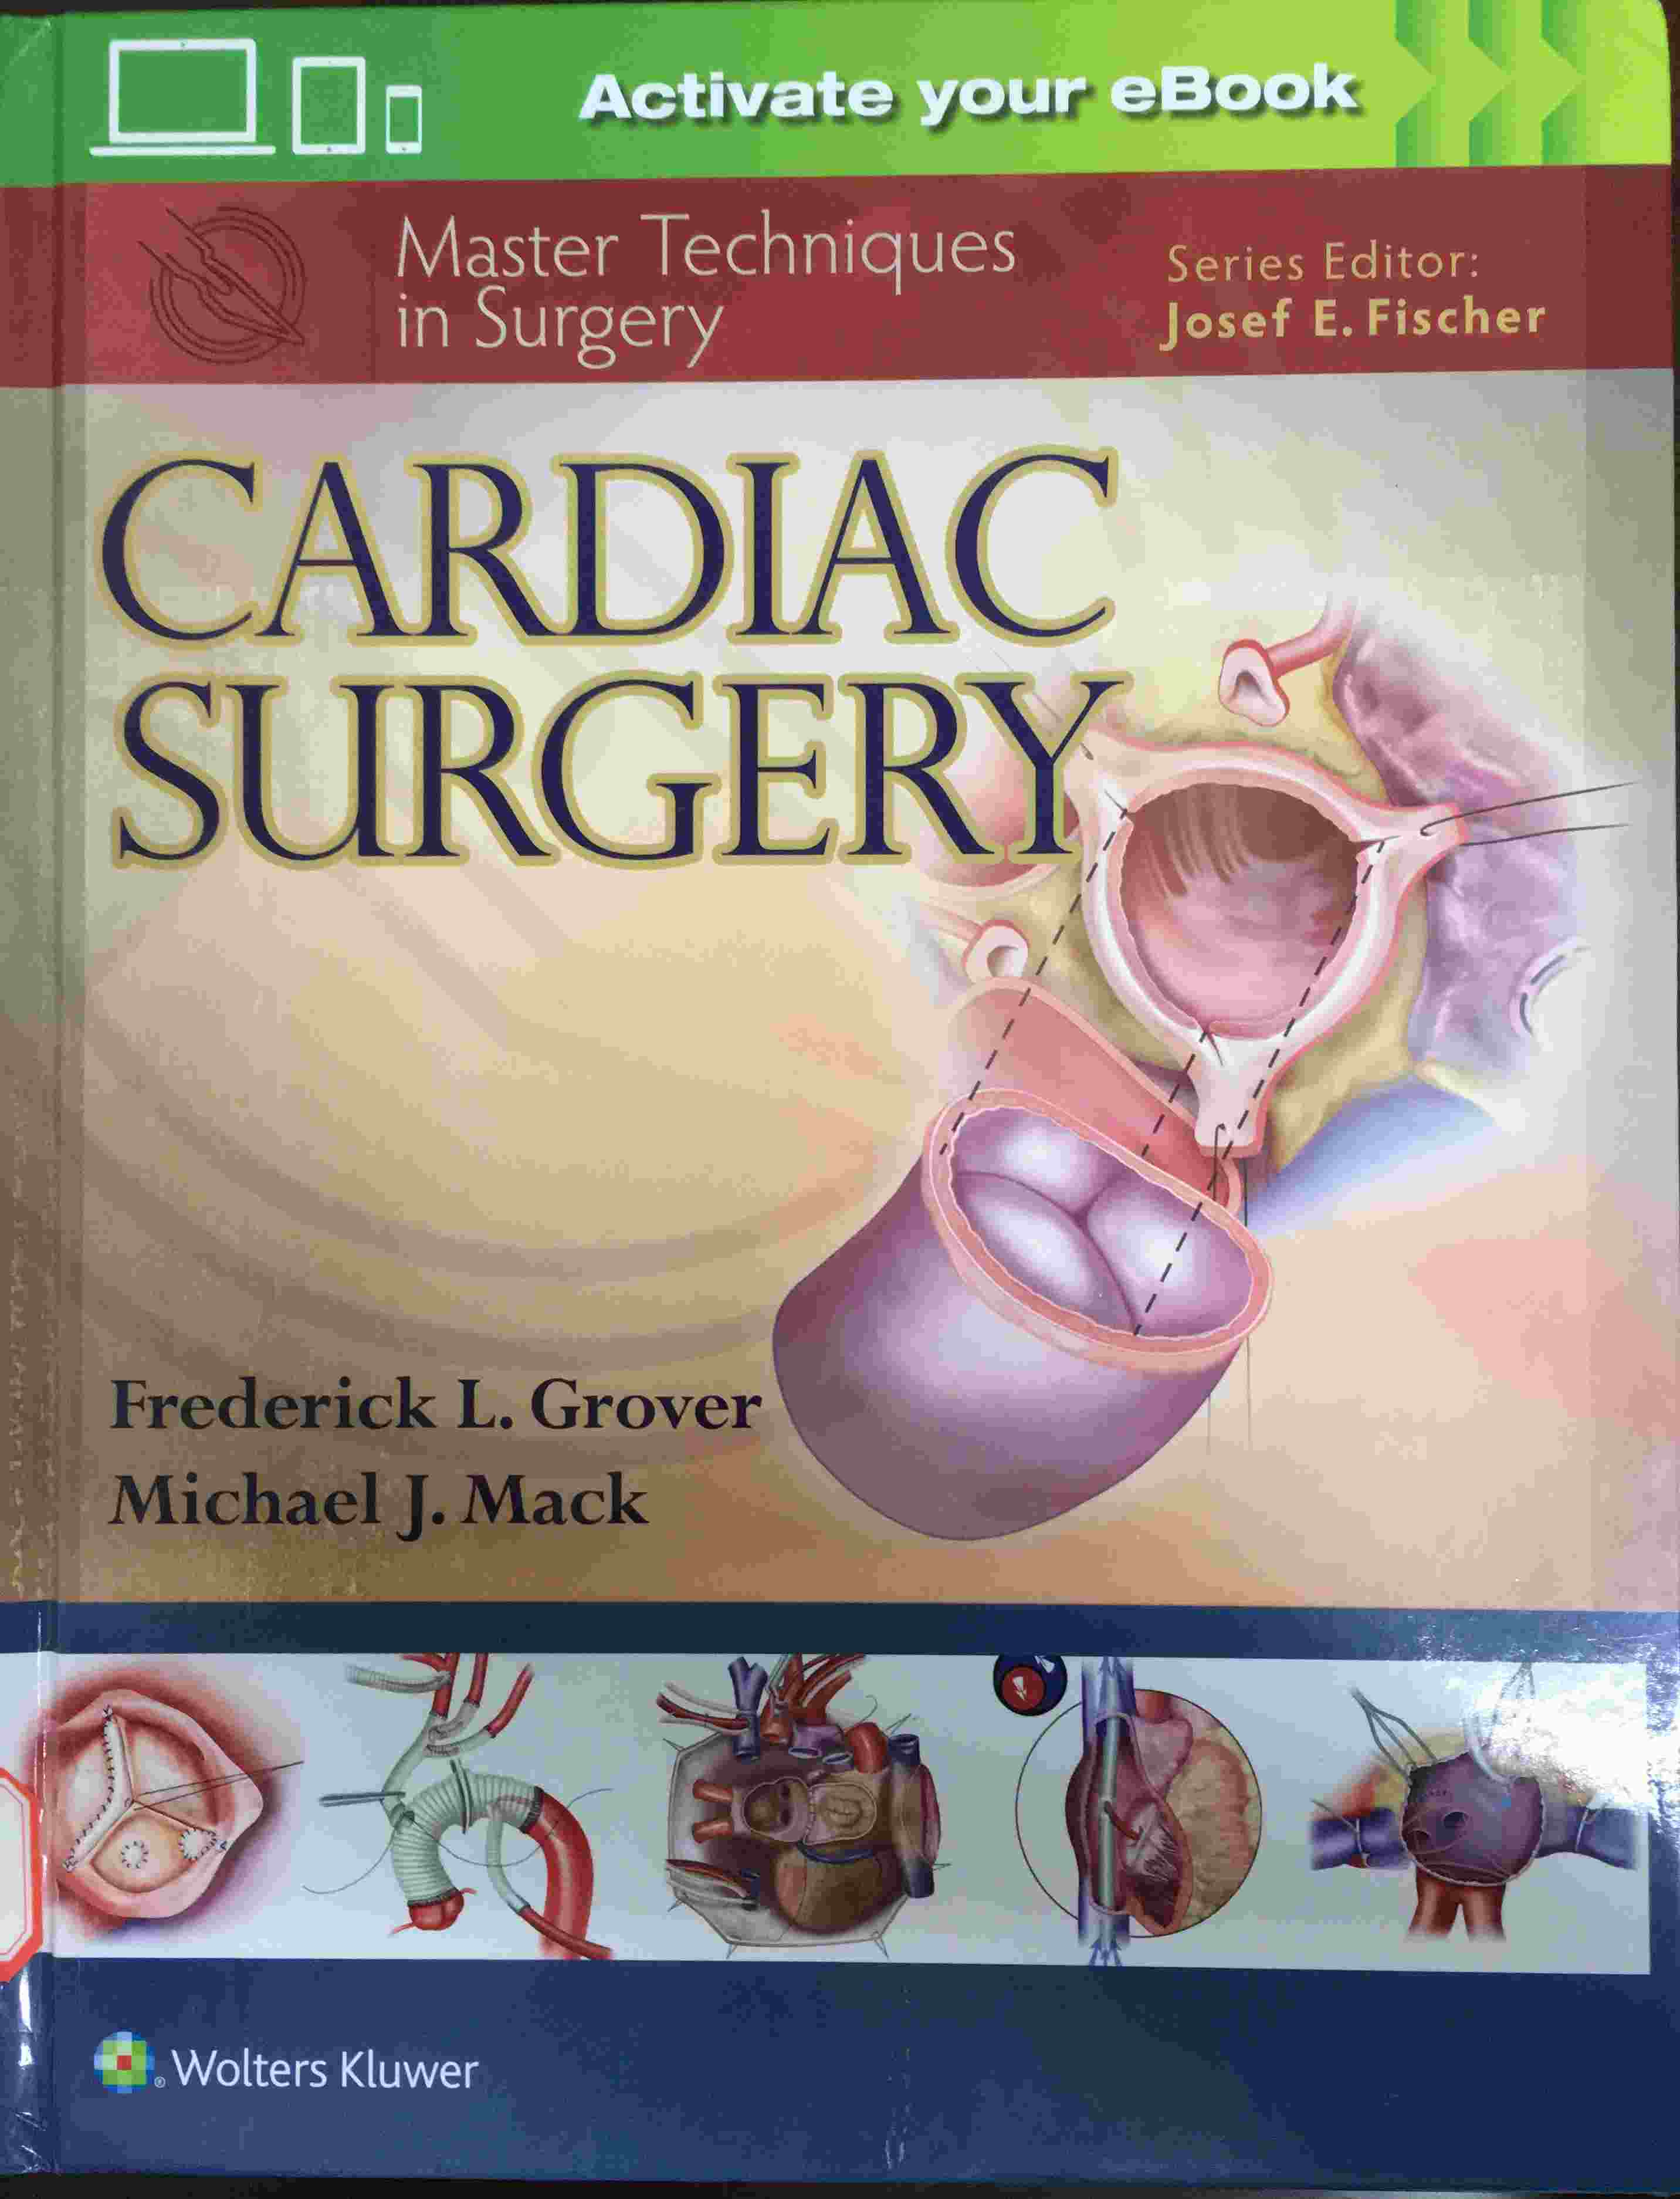 « Master Techniques in Surgery: Cardiac Surgery »